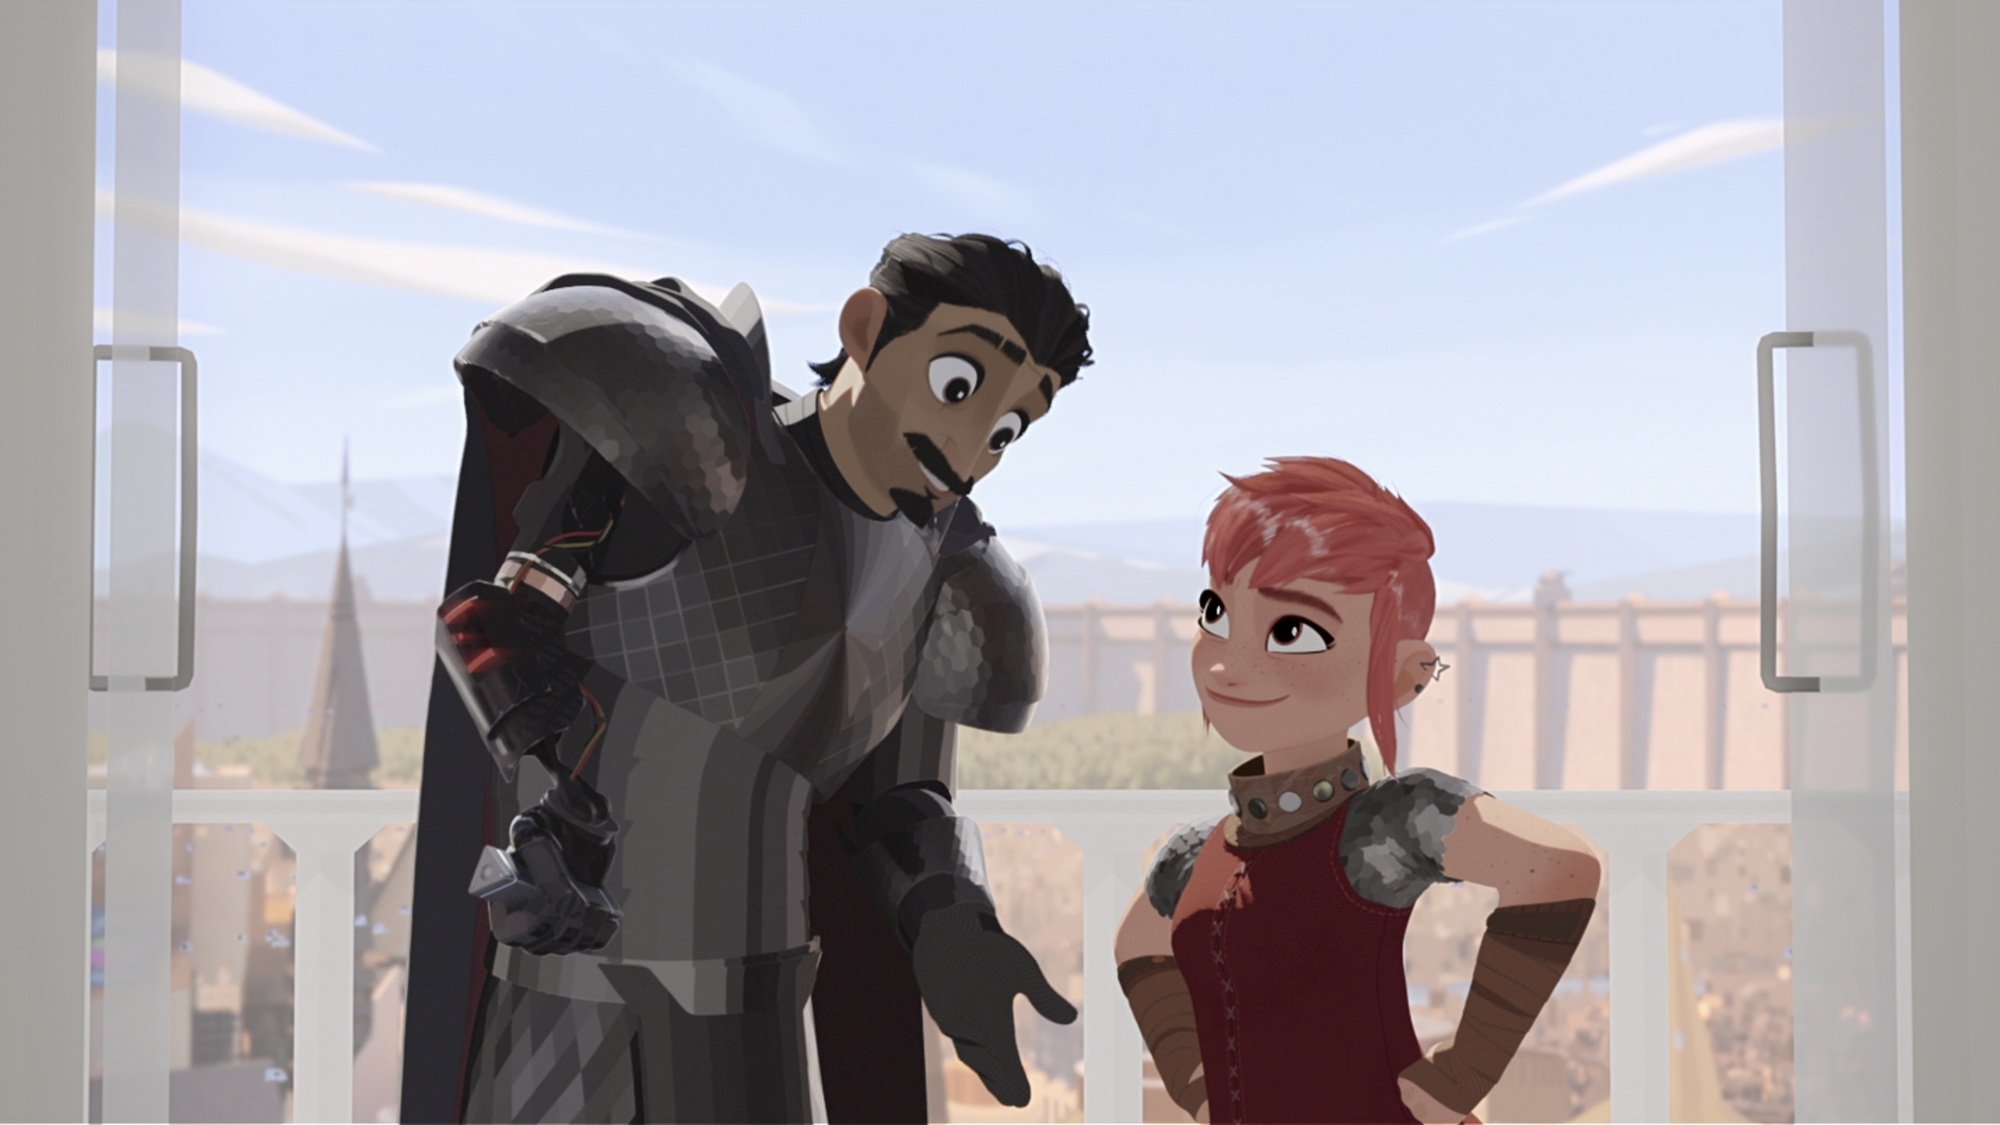 A knight in black armor and a young girl with pink hair smile while on a balcony overlooking a medieval kingdom.